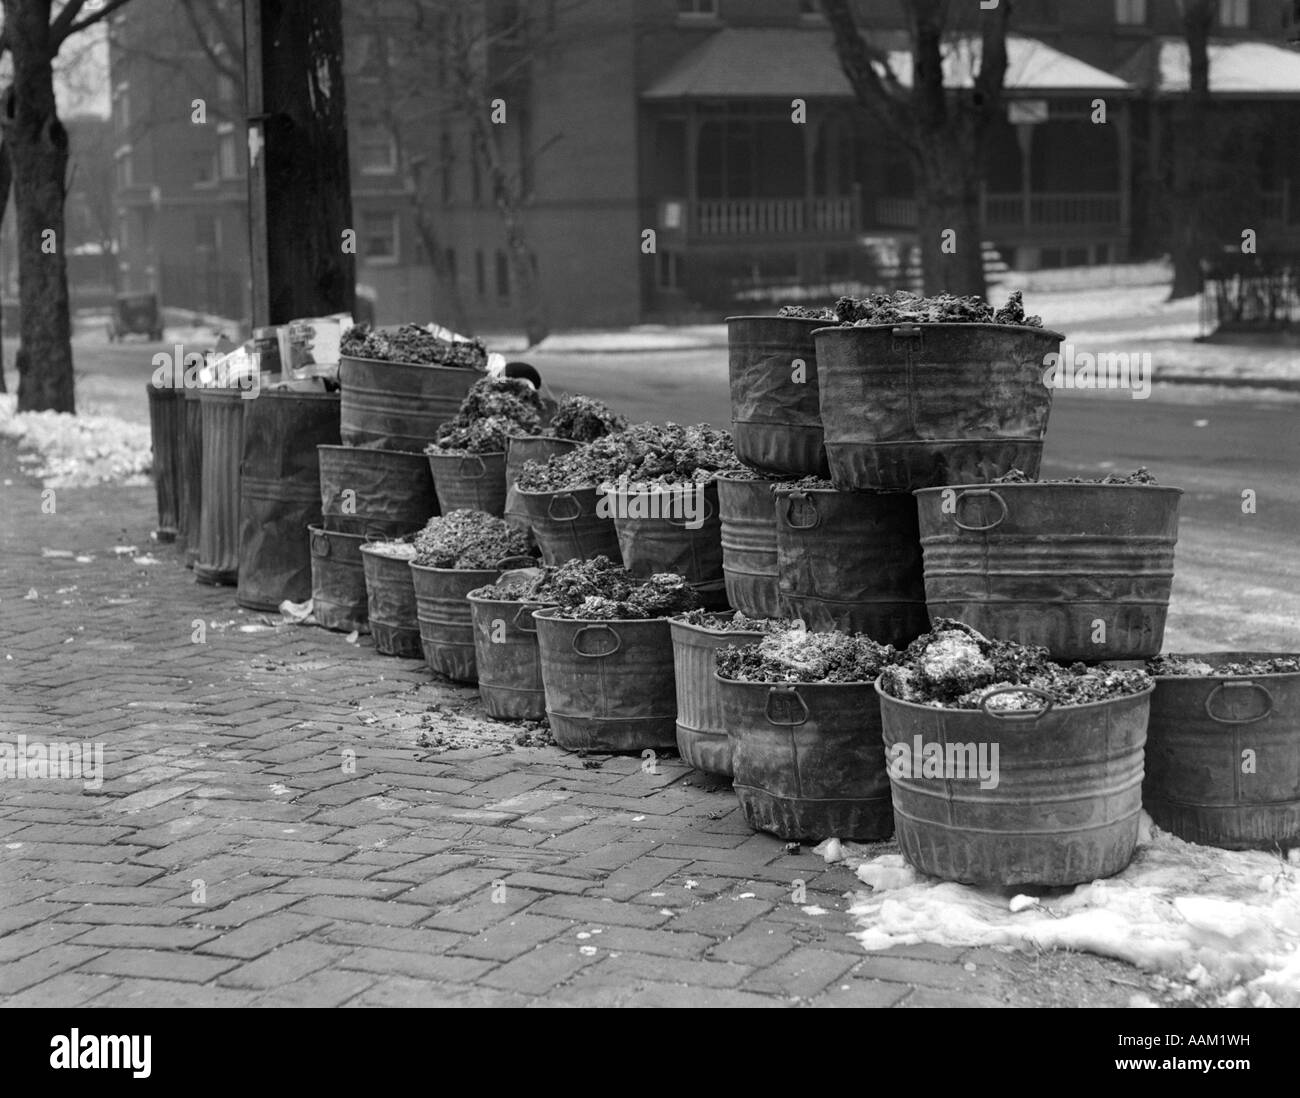 https://c8.alamy.com/comp/AAM1WH/1920s-1930a-coal-furnace-ash-cans-lined-up-on-brick-sidewalk-winter-AAM1WH.jpg